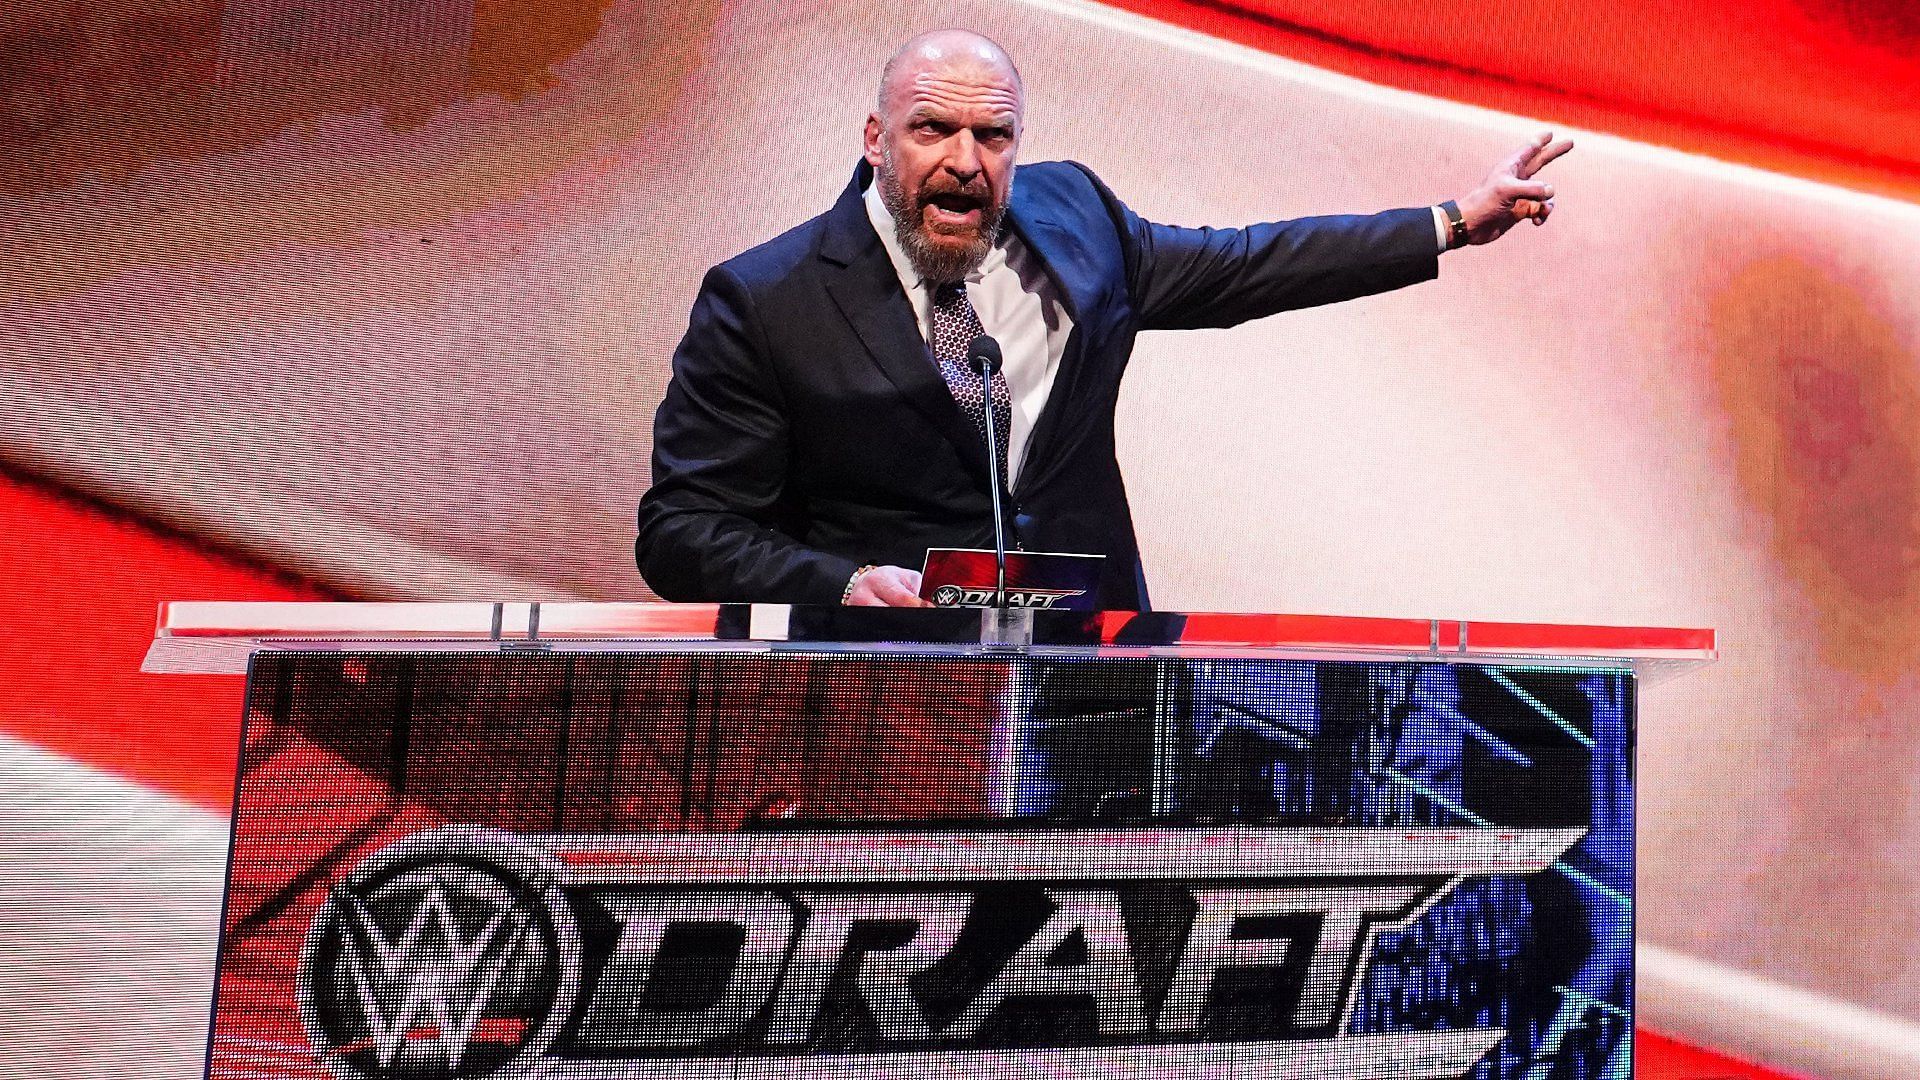 The draft will begin later tonight on SmackDown.